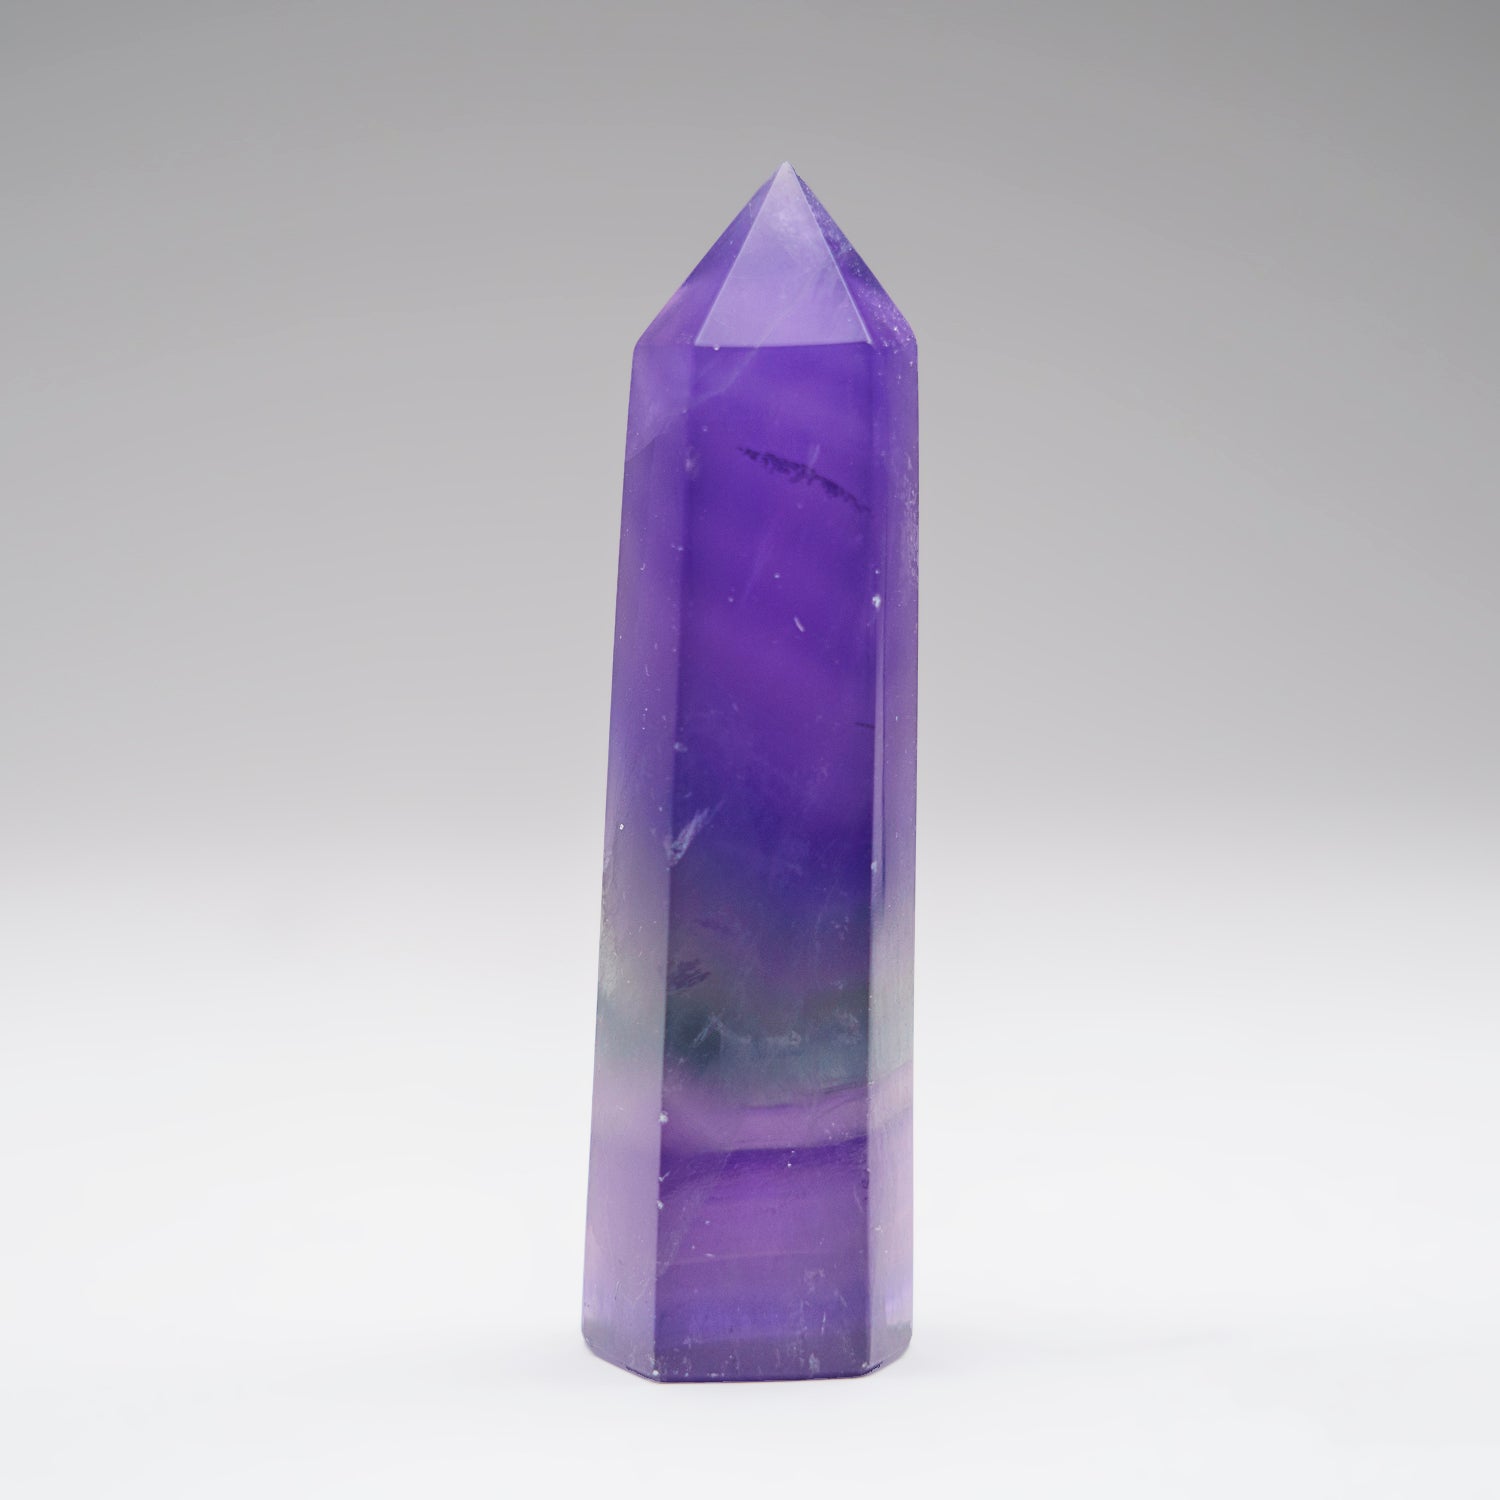 Genuine Polished Purple Fluorite Point from China (80 grams)